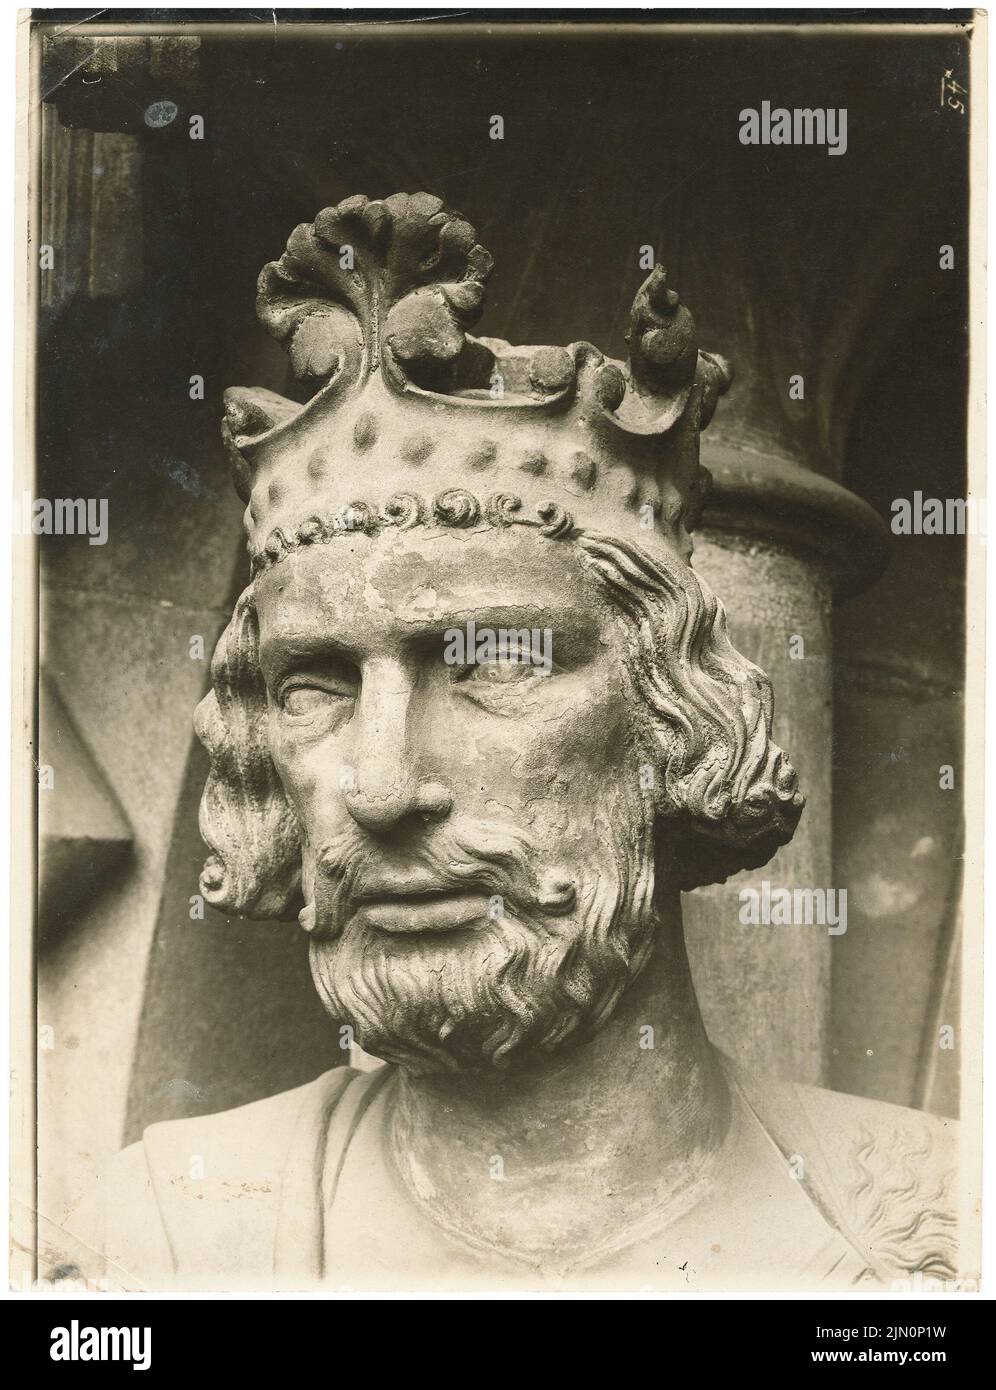 Unknown photographer, cathedral in Bamberg. Face of the figure of the emperor Heinrich the saint at the Adamspforte (without dat.): View of diagonally left. Photo, 24 x 18.4 cm (including scan edges) unbek. Fotograf : Dom in Bamberg. Gesicht der Figur des Kaisers Heinrich der Heilige an der Adamspforte (ohne Dat.) Stock Photo